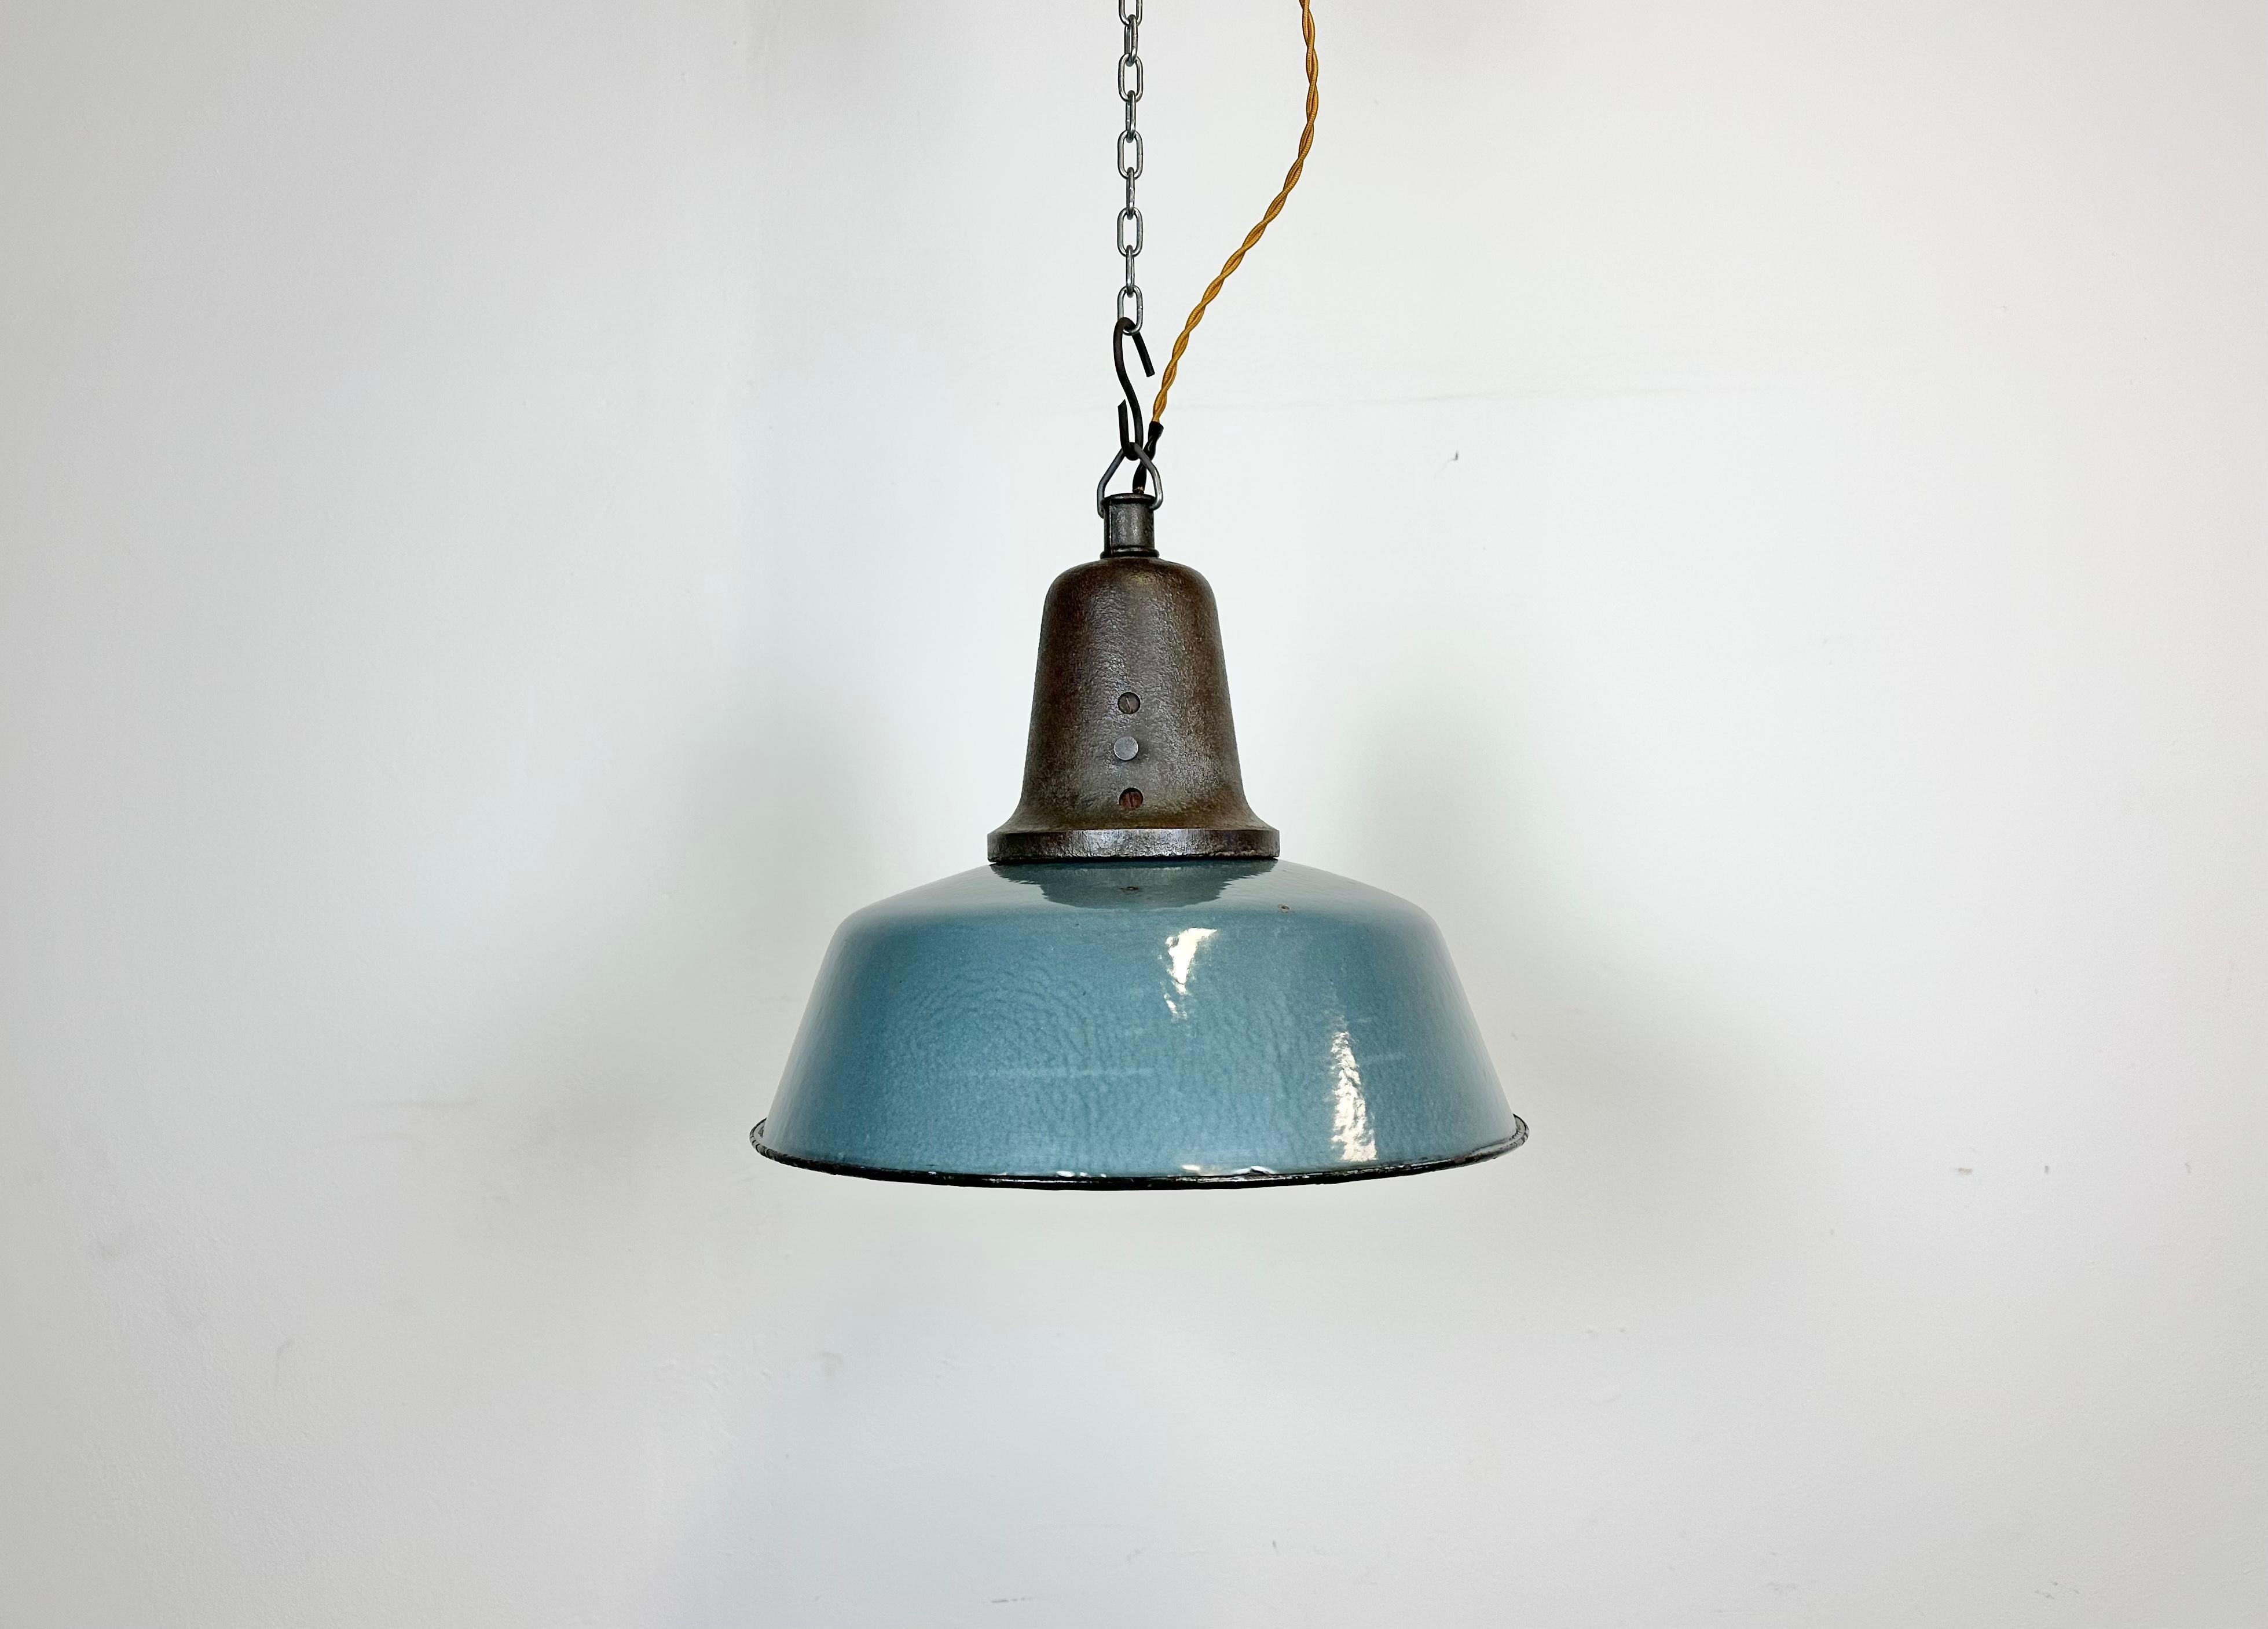 Industrial blue enamel pendant light made in Poland during the 1960s. White enamel inside the shade. Cast iron top. The porcelain socket requires E 27/ E26 light bulbs. New wire. Fully functional. The weight of the lamp is 2.8 kg.